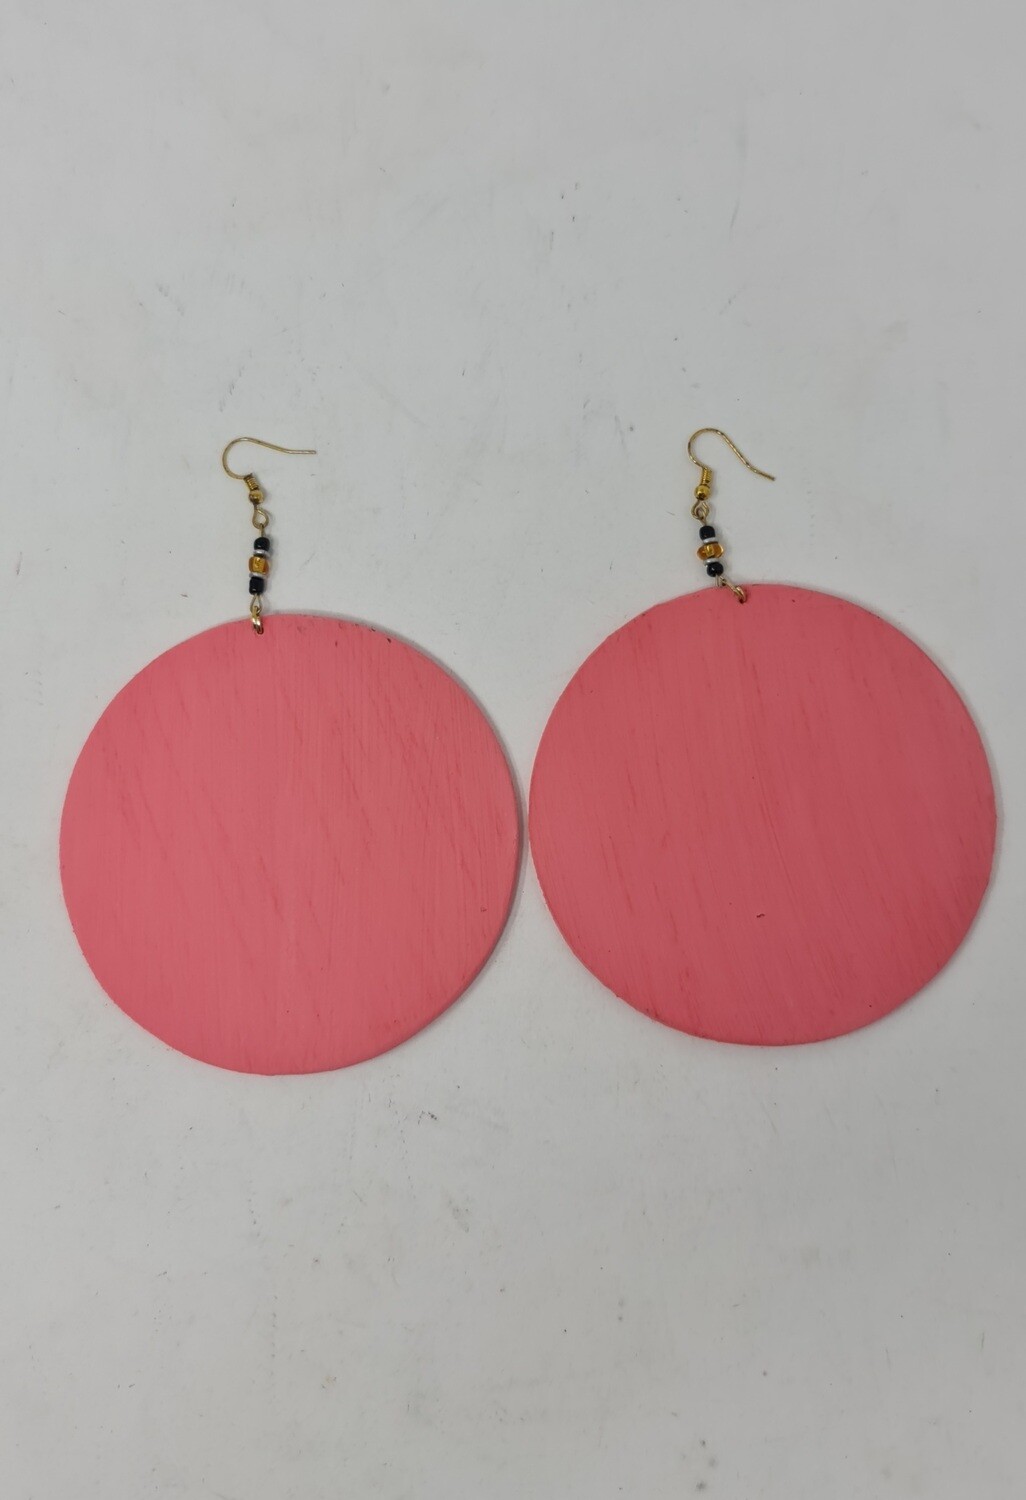 Hand Carved Wooden Earrings - Pink